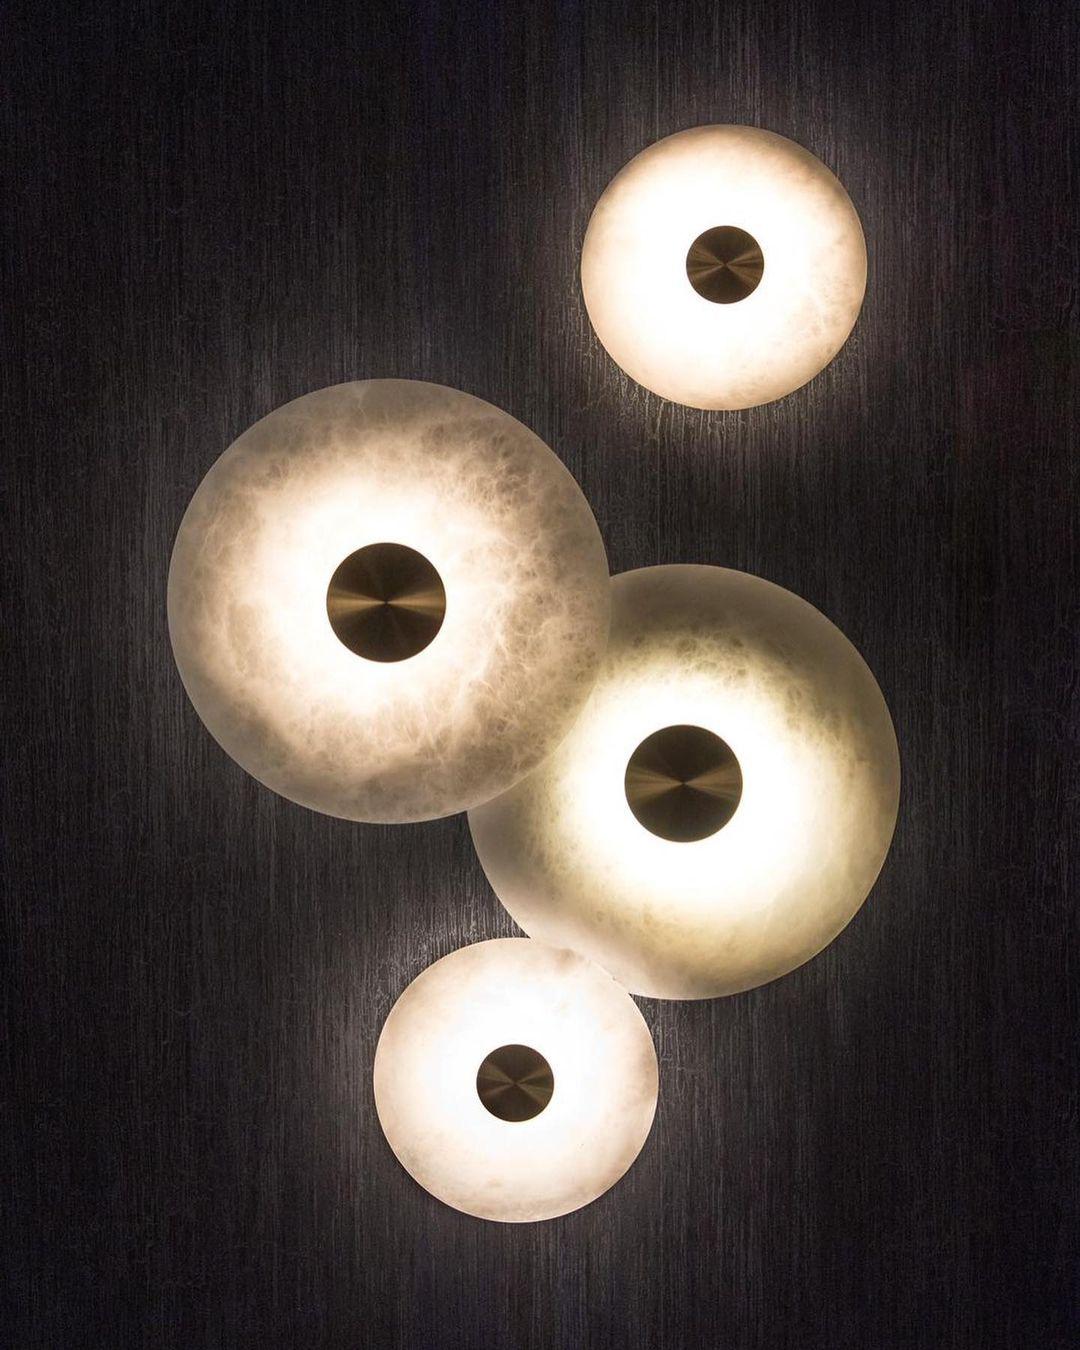 Bide wall light set by Bert Frank
Dimensions: 
Small H 18 x W 18 x D 6.4 cm
Large H 28 x W 28 x D 6.4 cm
Materials: Brass, alabaster

Available finishes: Brass, alabaster
All our lamps can be wired according to each country. If sold to the